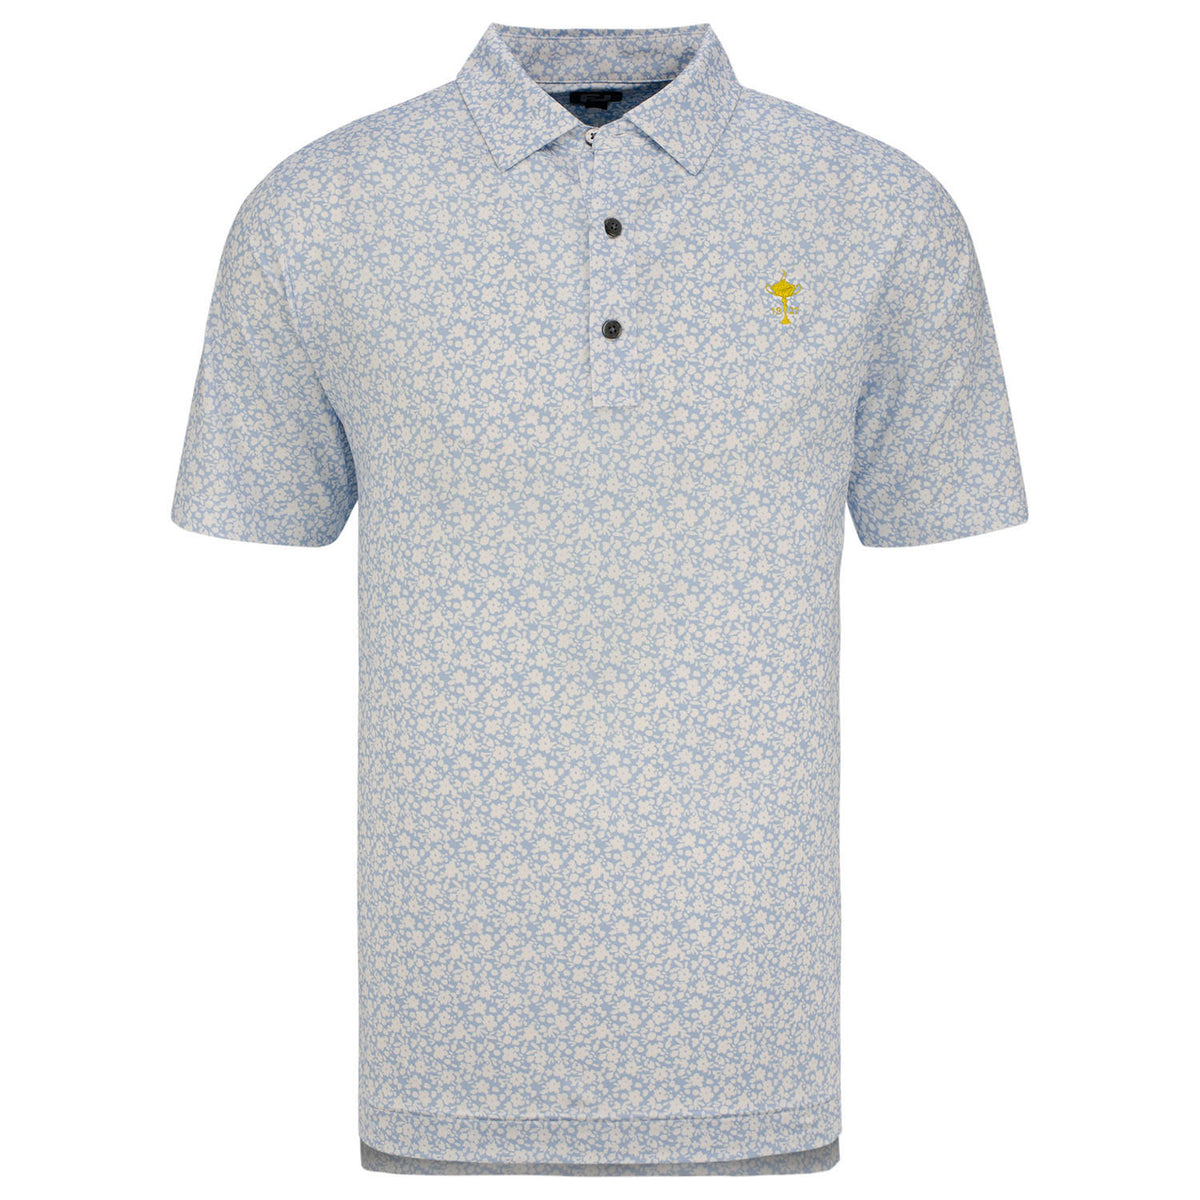 FootJoy Floral Print Polo in White and Blue- Front View